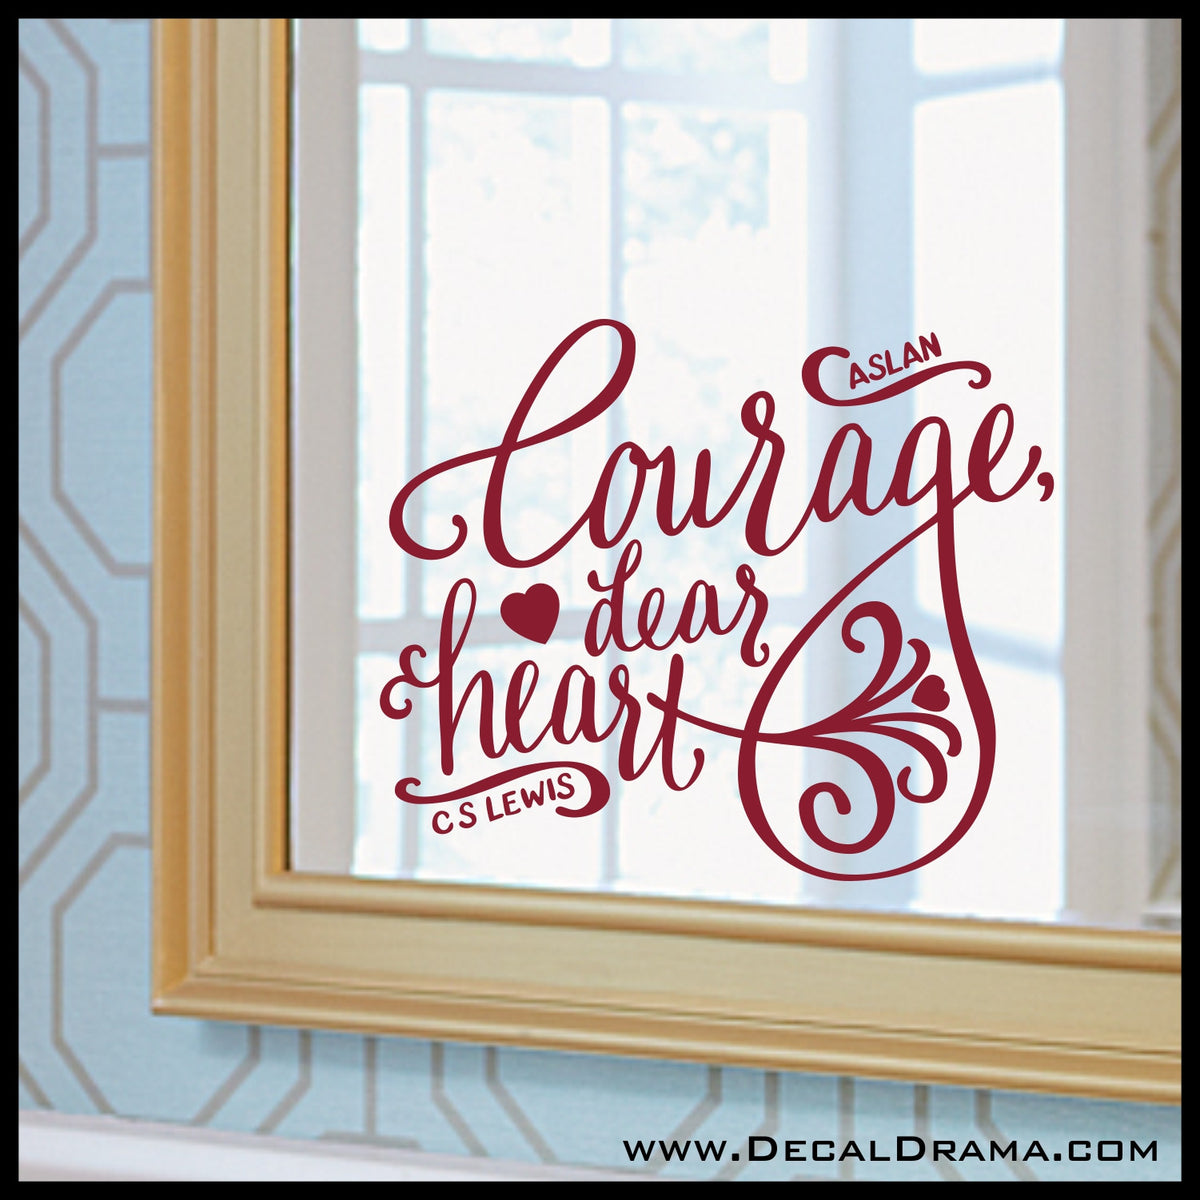  Courage Dear Heart Aslan Quote Sticker - CS Lewis Sticker for  Hydroflask - Narnia Laptop Decals - Christian Book Lover Gift - Fantasy  Literature Great Quotes : Handmade Products